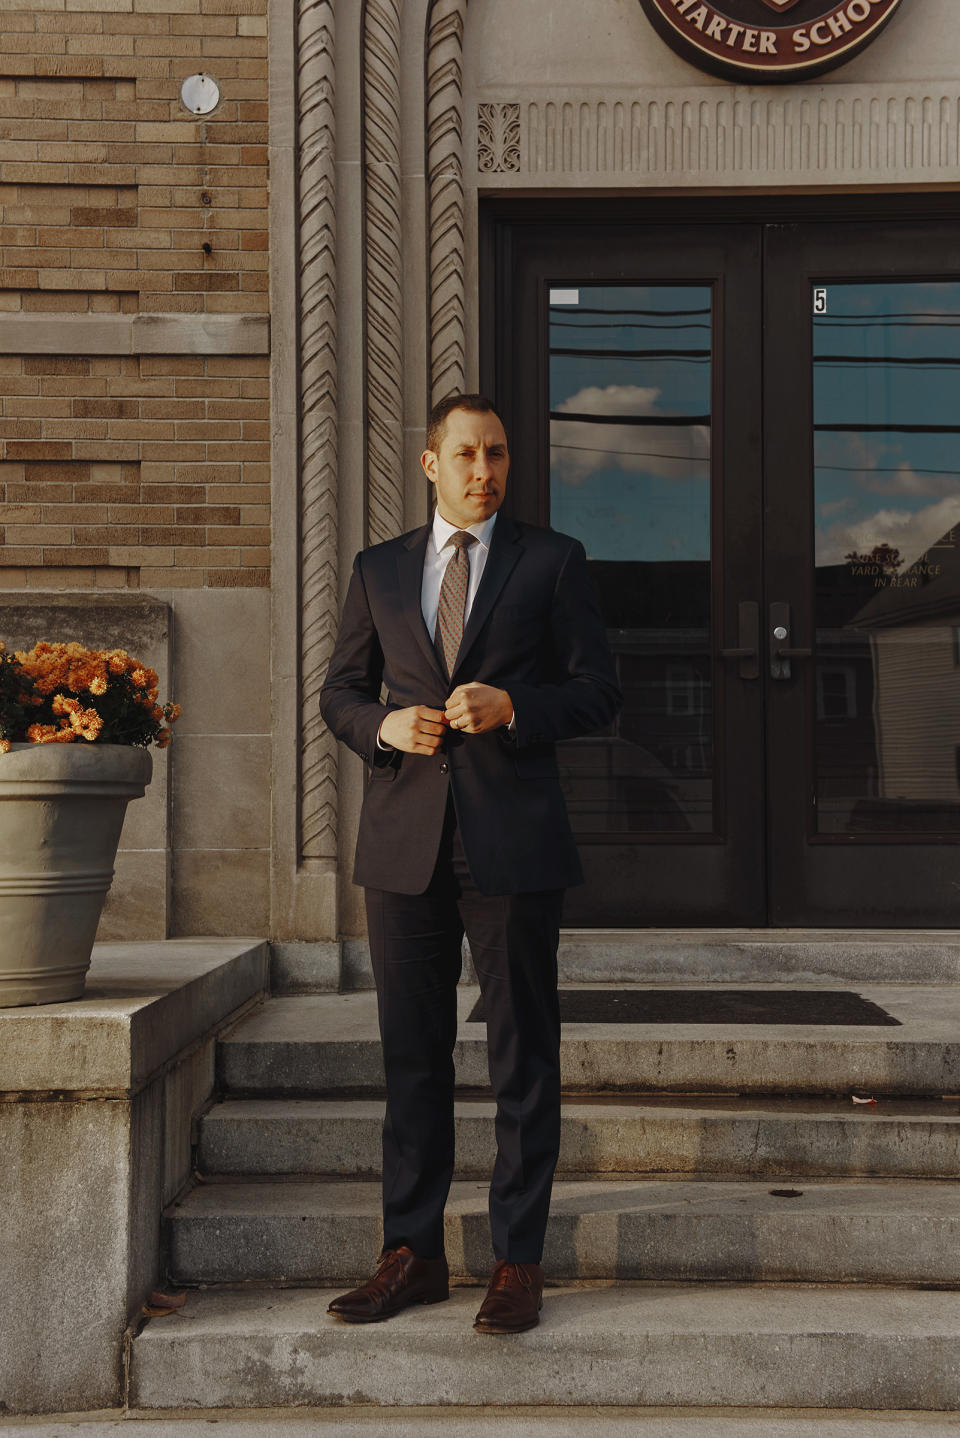 Alex Dan, director and superintendent of the Mystic Valley Charter School, on the steps of the high school in Malden on Nov. 19<span class="copyright">Tony Luong for TIME</span>